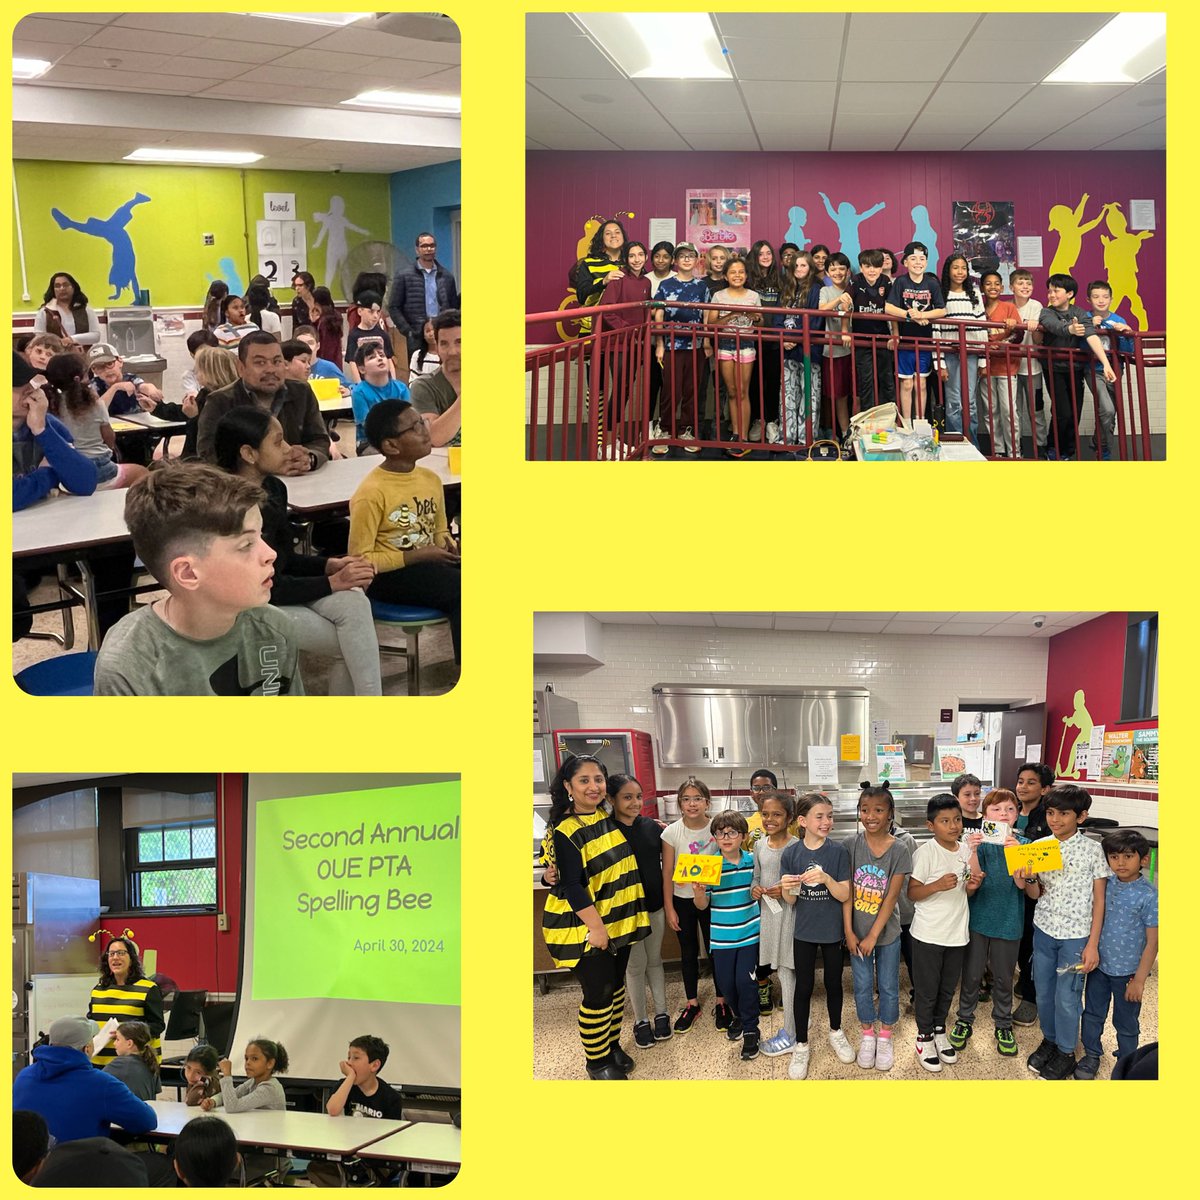 The 2nd annual OUE PTA Spelling Bee 🐝 was a success! Special thanks to the volunteer judges, @castellanomami and @ferzeen_shamsi for facilitating, as well as OPrime, @OssiningA, and NYSUT for the book giveaway! @ComSchoolLeader, @MsVaccaroClass